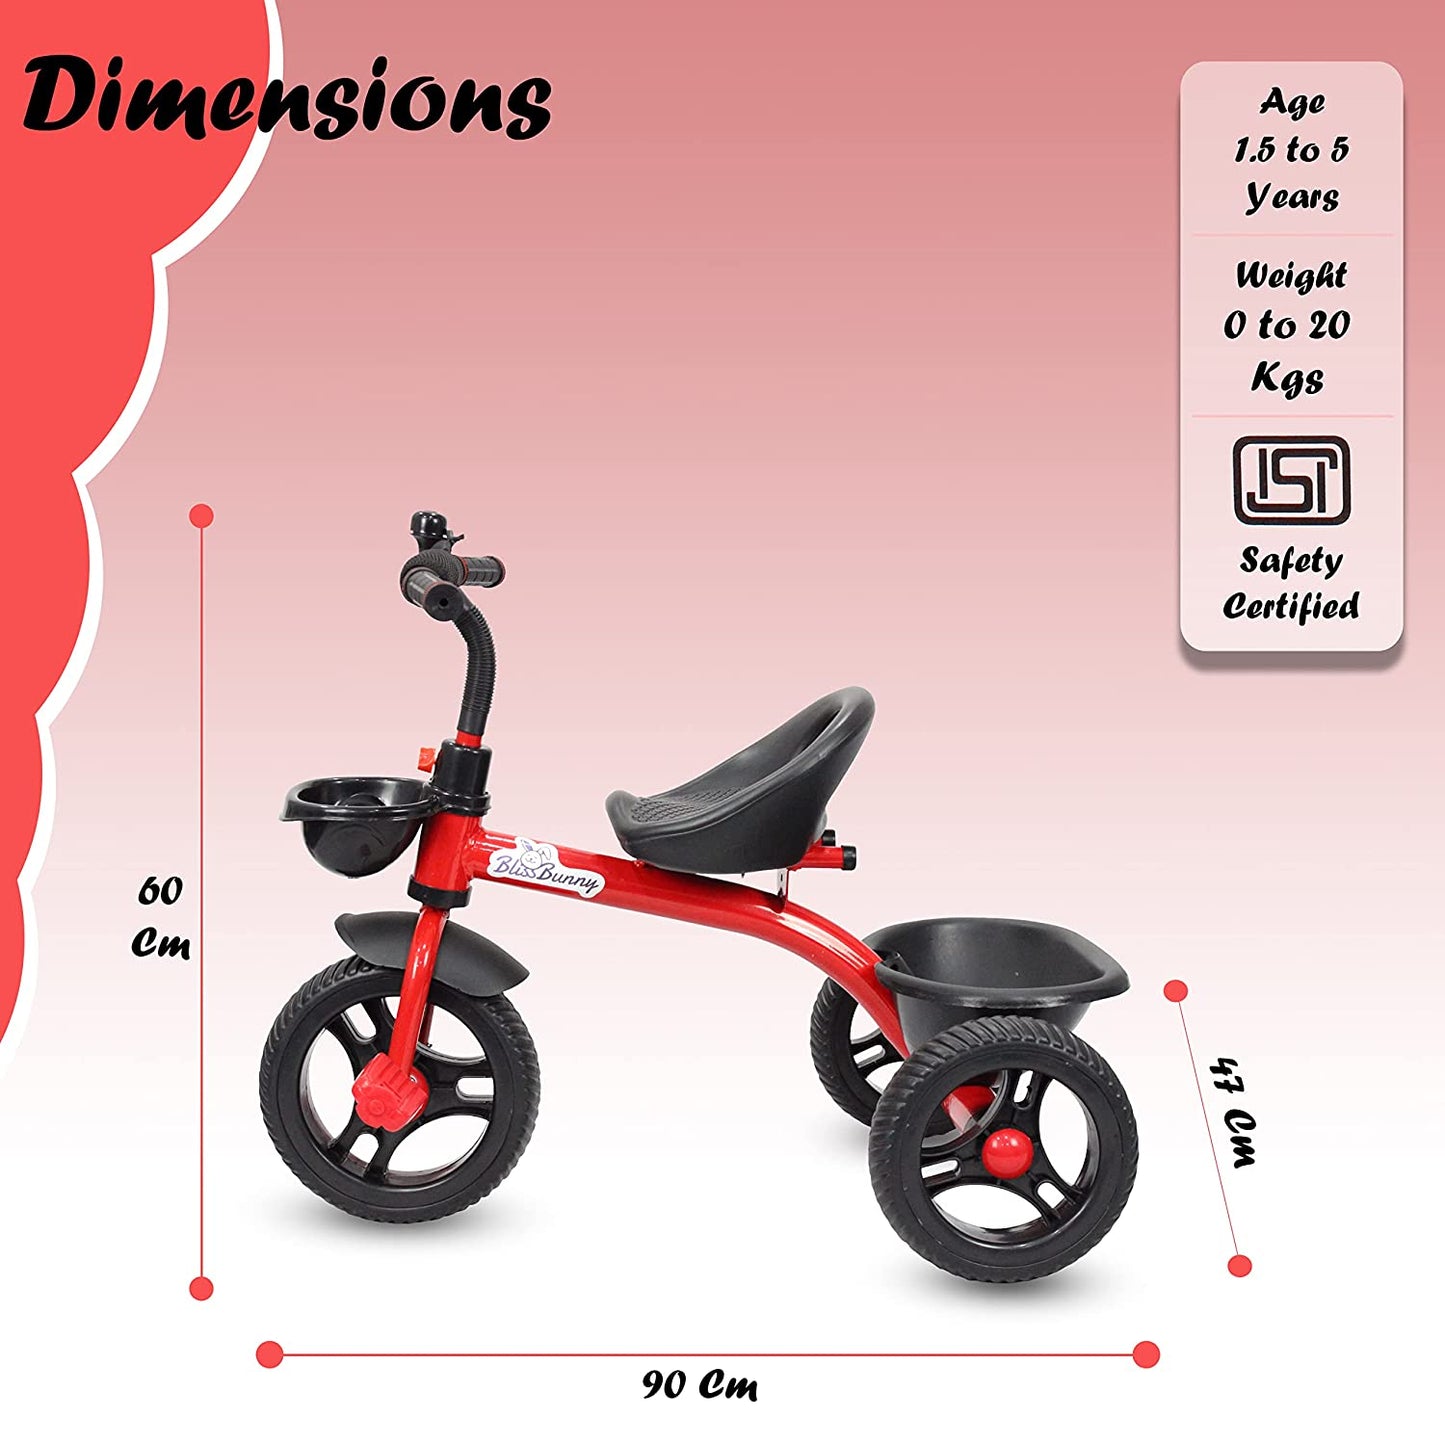 Trike Bike, Push Trike, Cycle-Super Duper Cool Tricycle For Your Toddler ( 3 to 6 Years) (Black, Red)